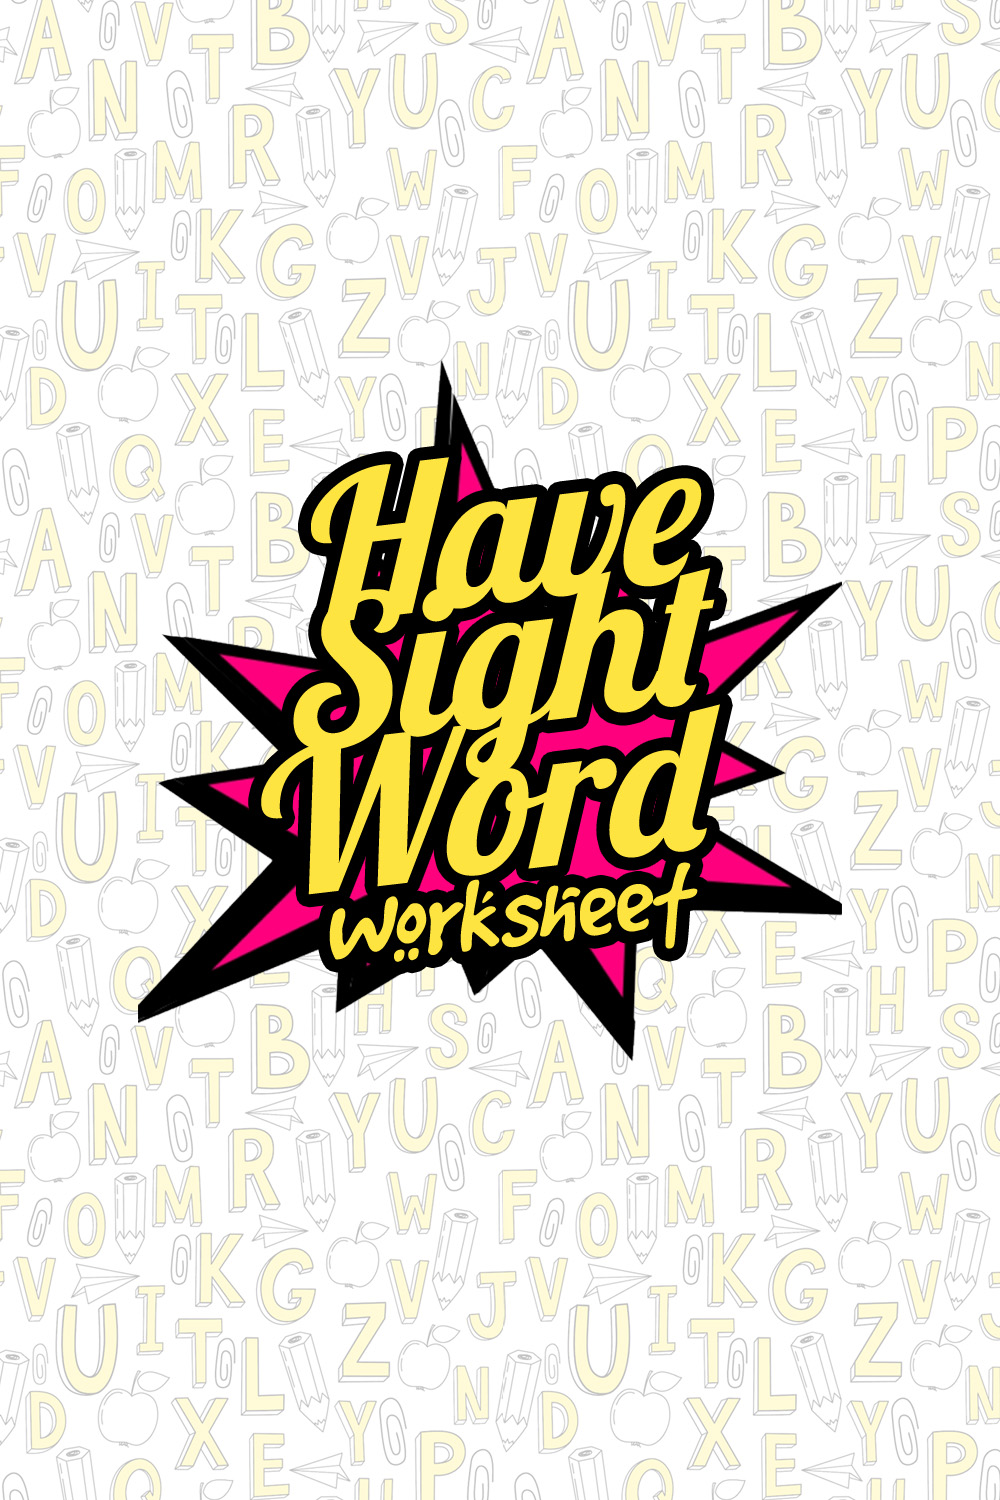 20 Images of Have Sight Word Worksheet